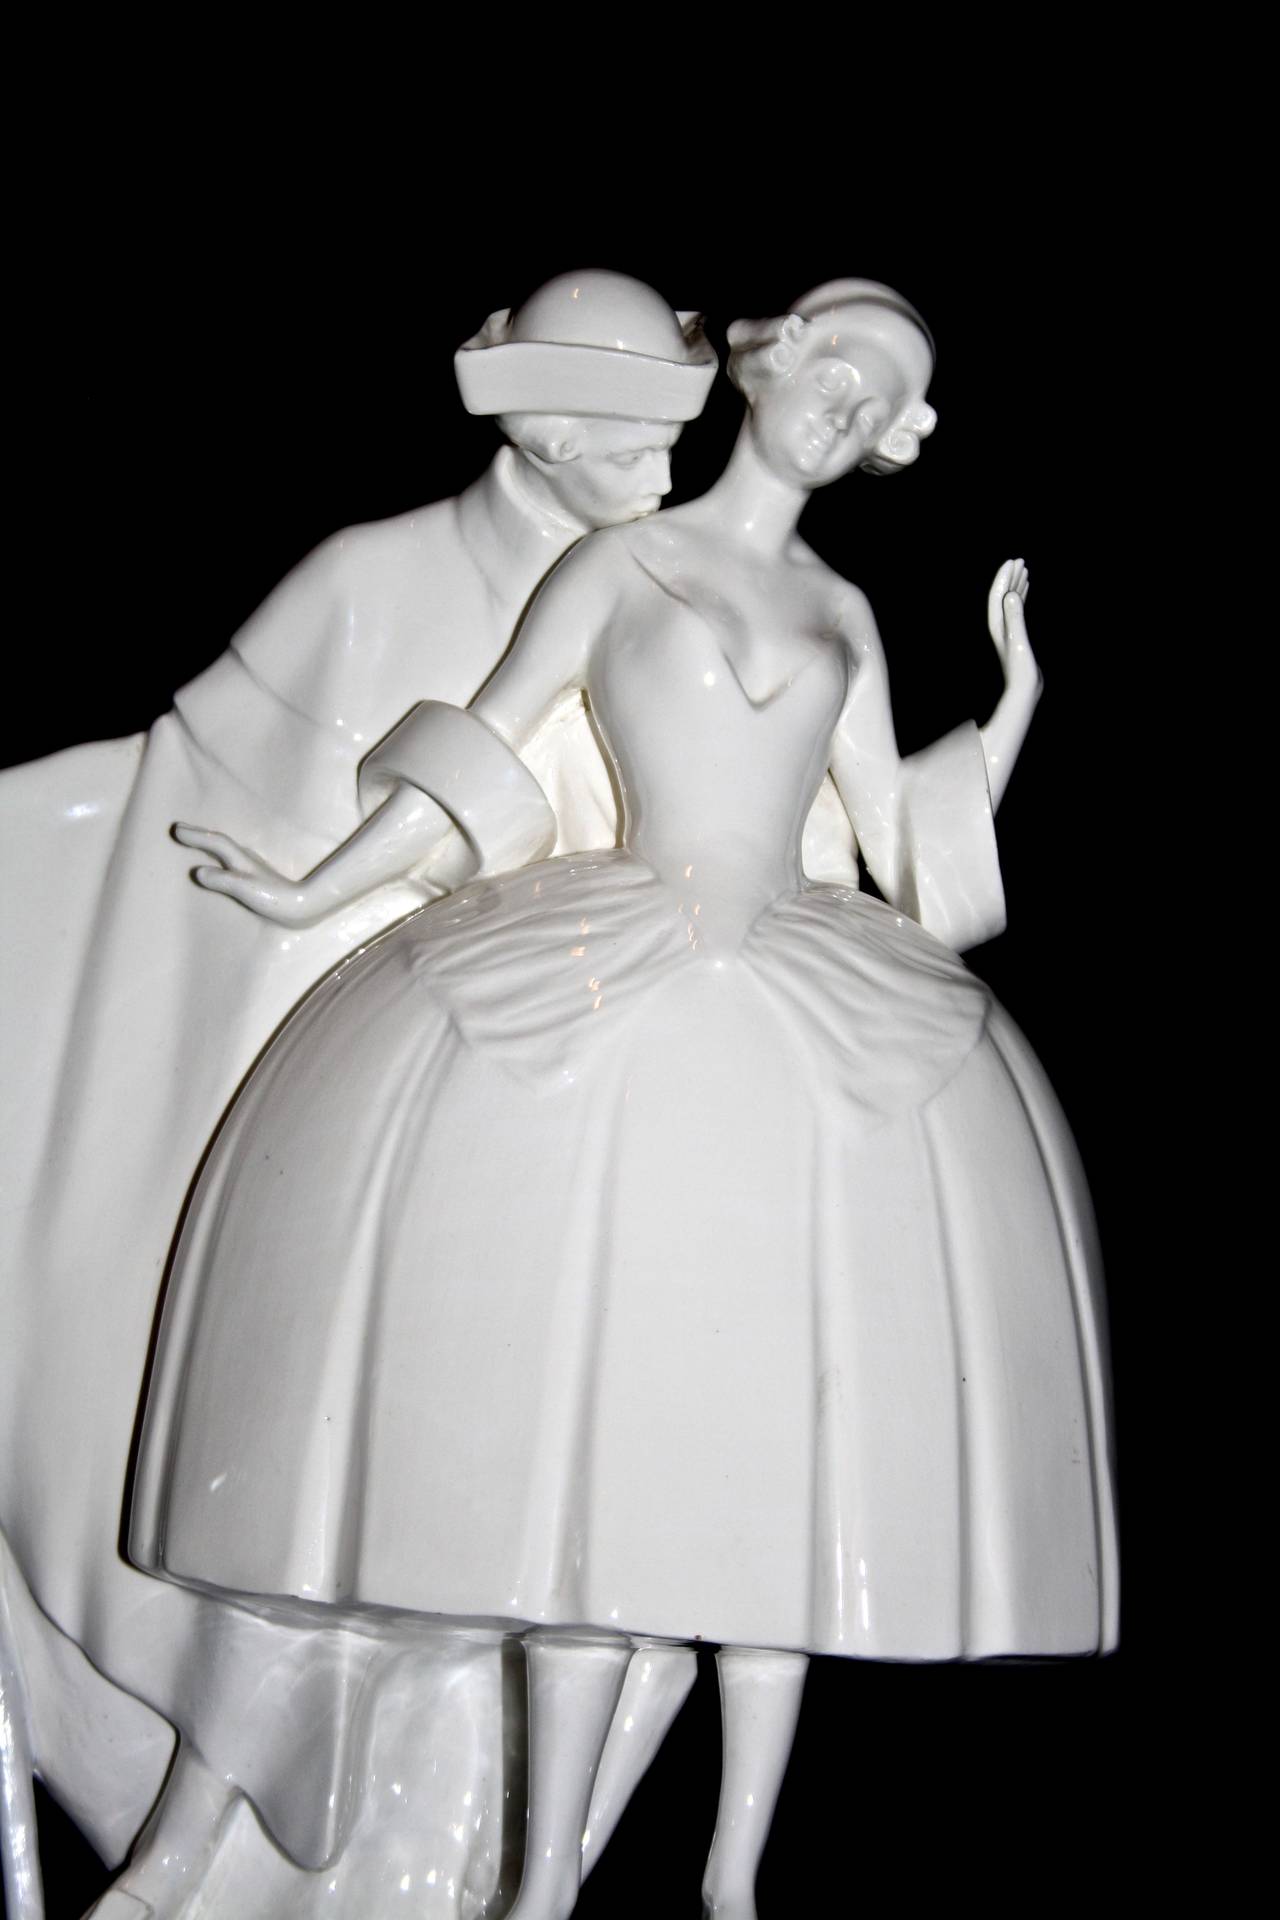 A stunning example of early Goldscheider in the Art Deco or Nouveau Period
Model Number 5517
Snow white ceramic with a variated Royal Blue Base
Exquisitely modelled with all the finer Details ones comes to expect from the quality firm